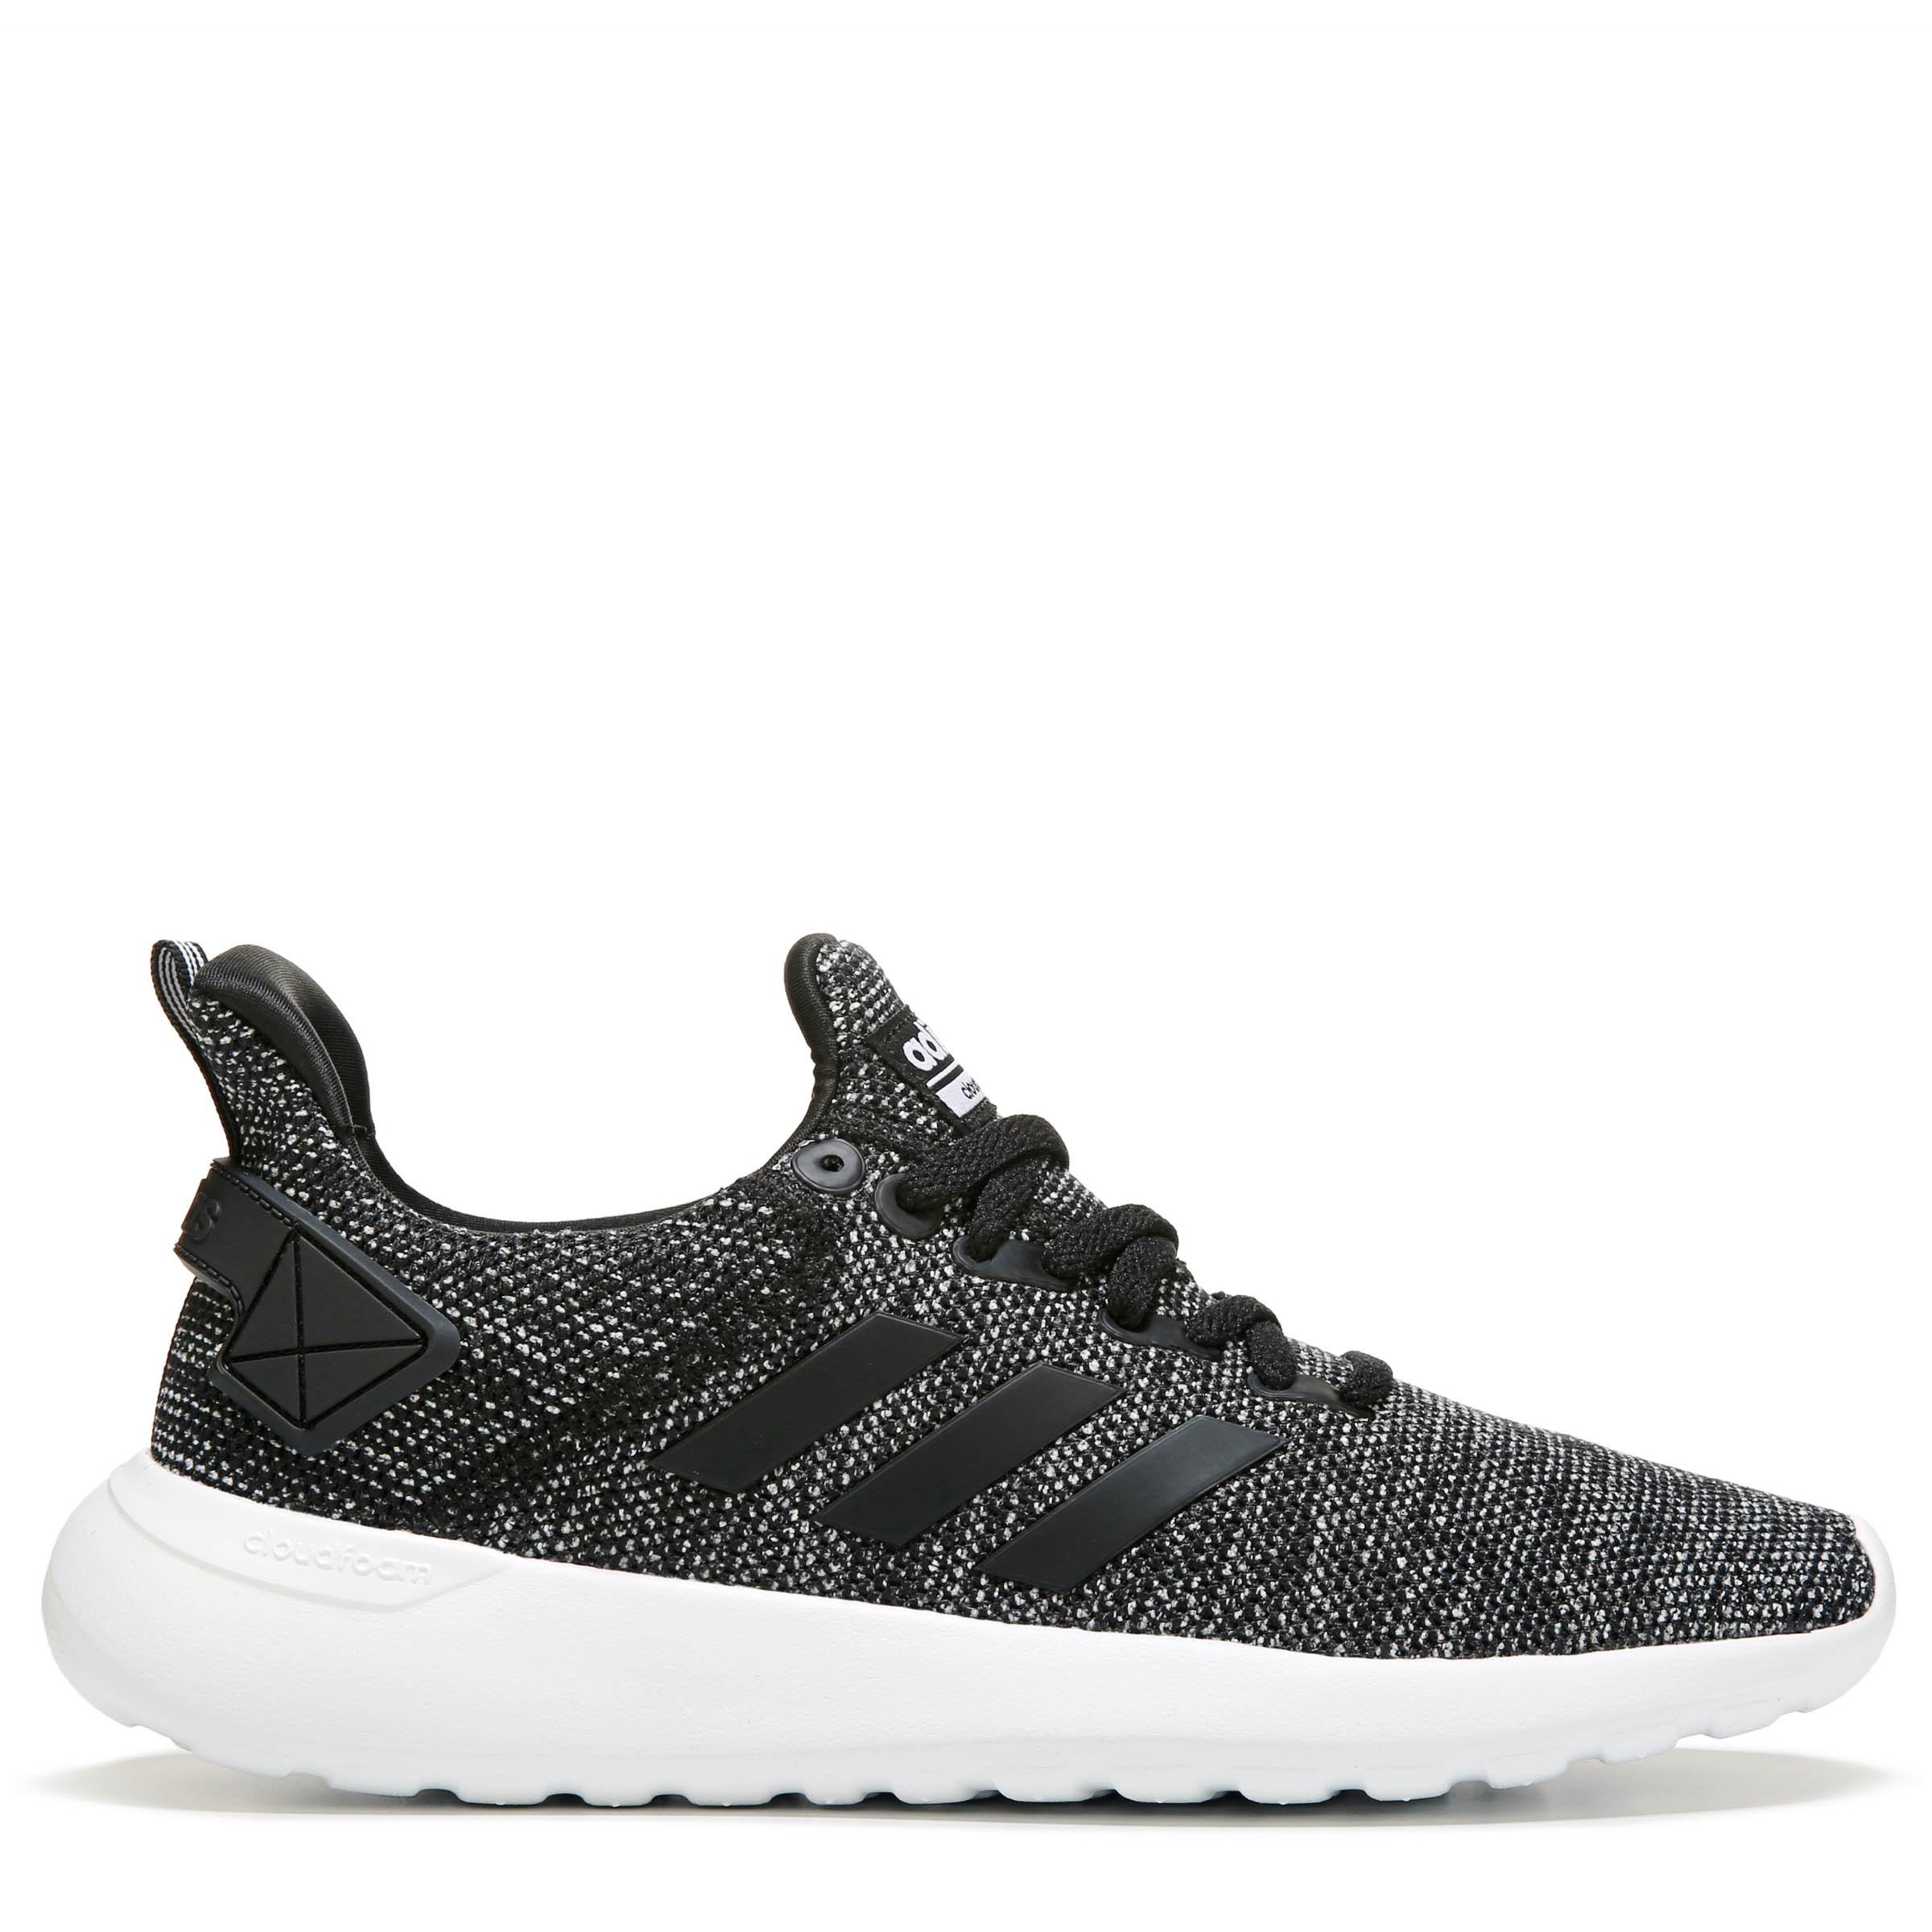 adidas Synthetic Cloudfoam Lite Racer Byd Sneakers in Black/White ...